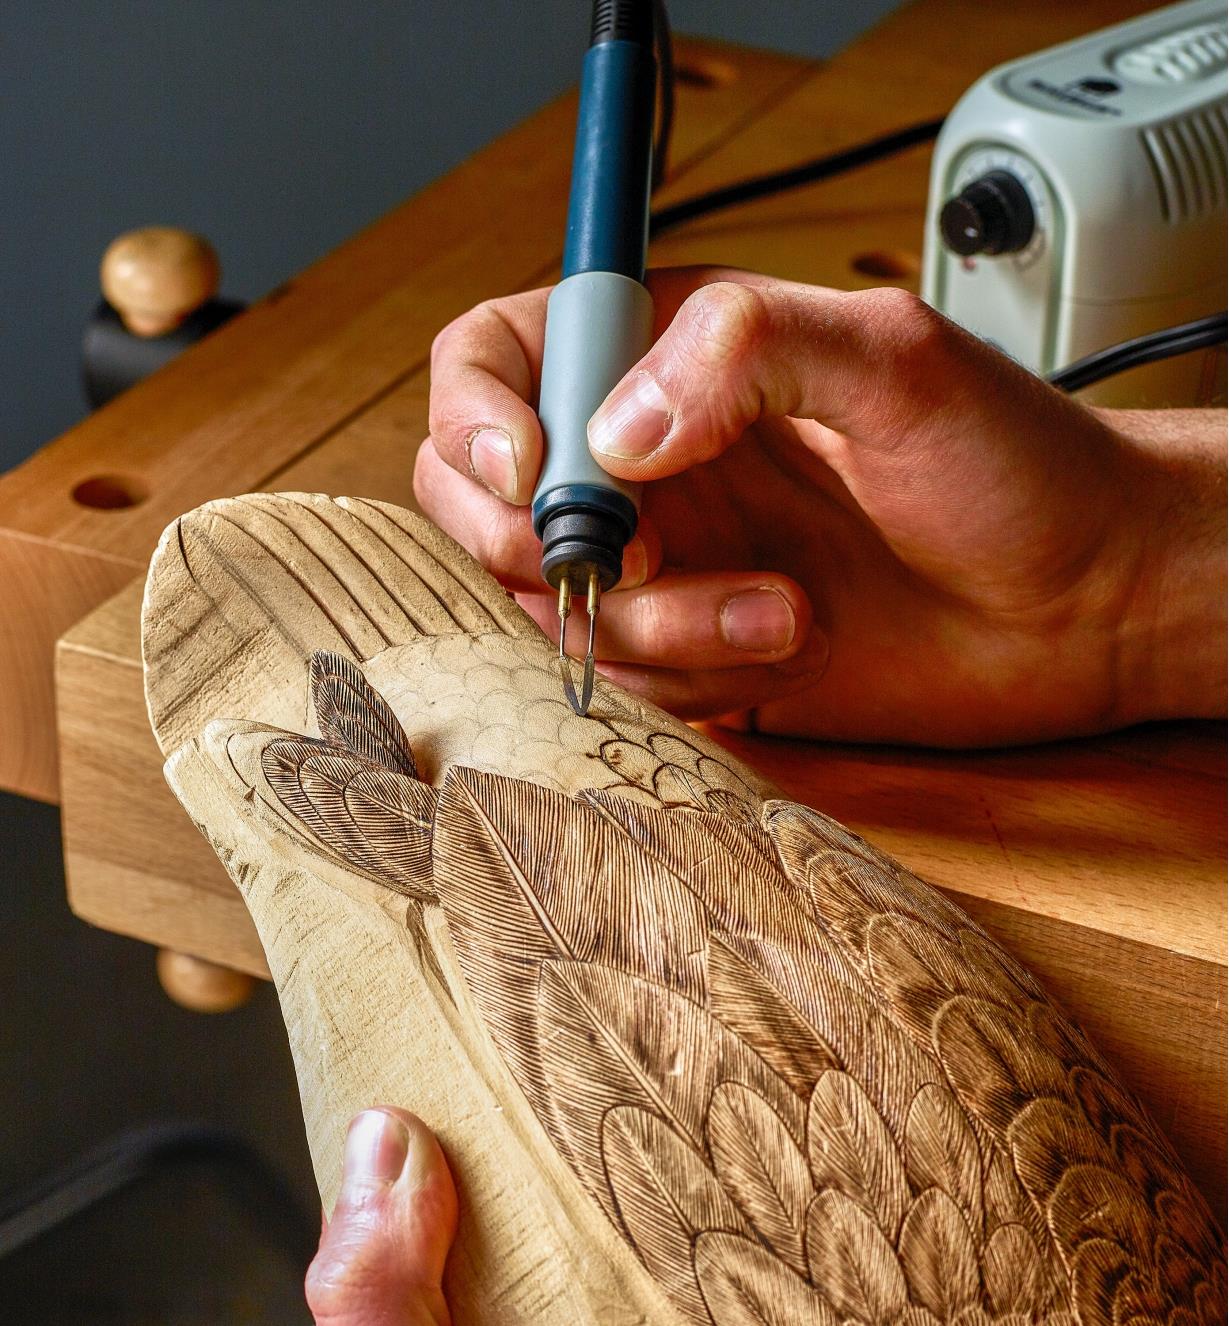 Burning feather designs onto a wooden duck